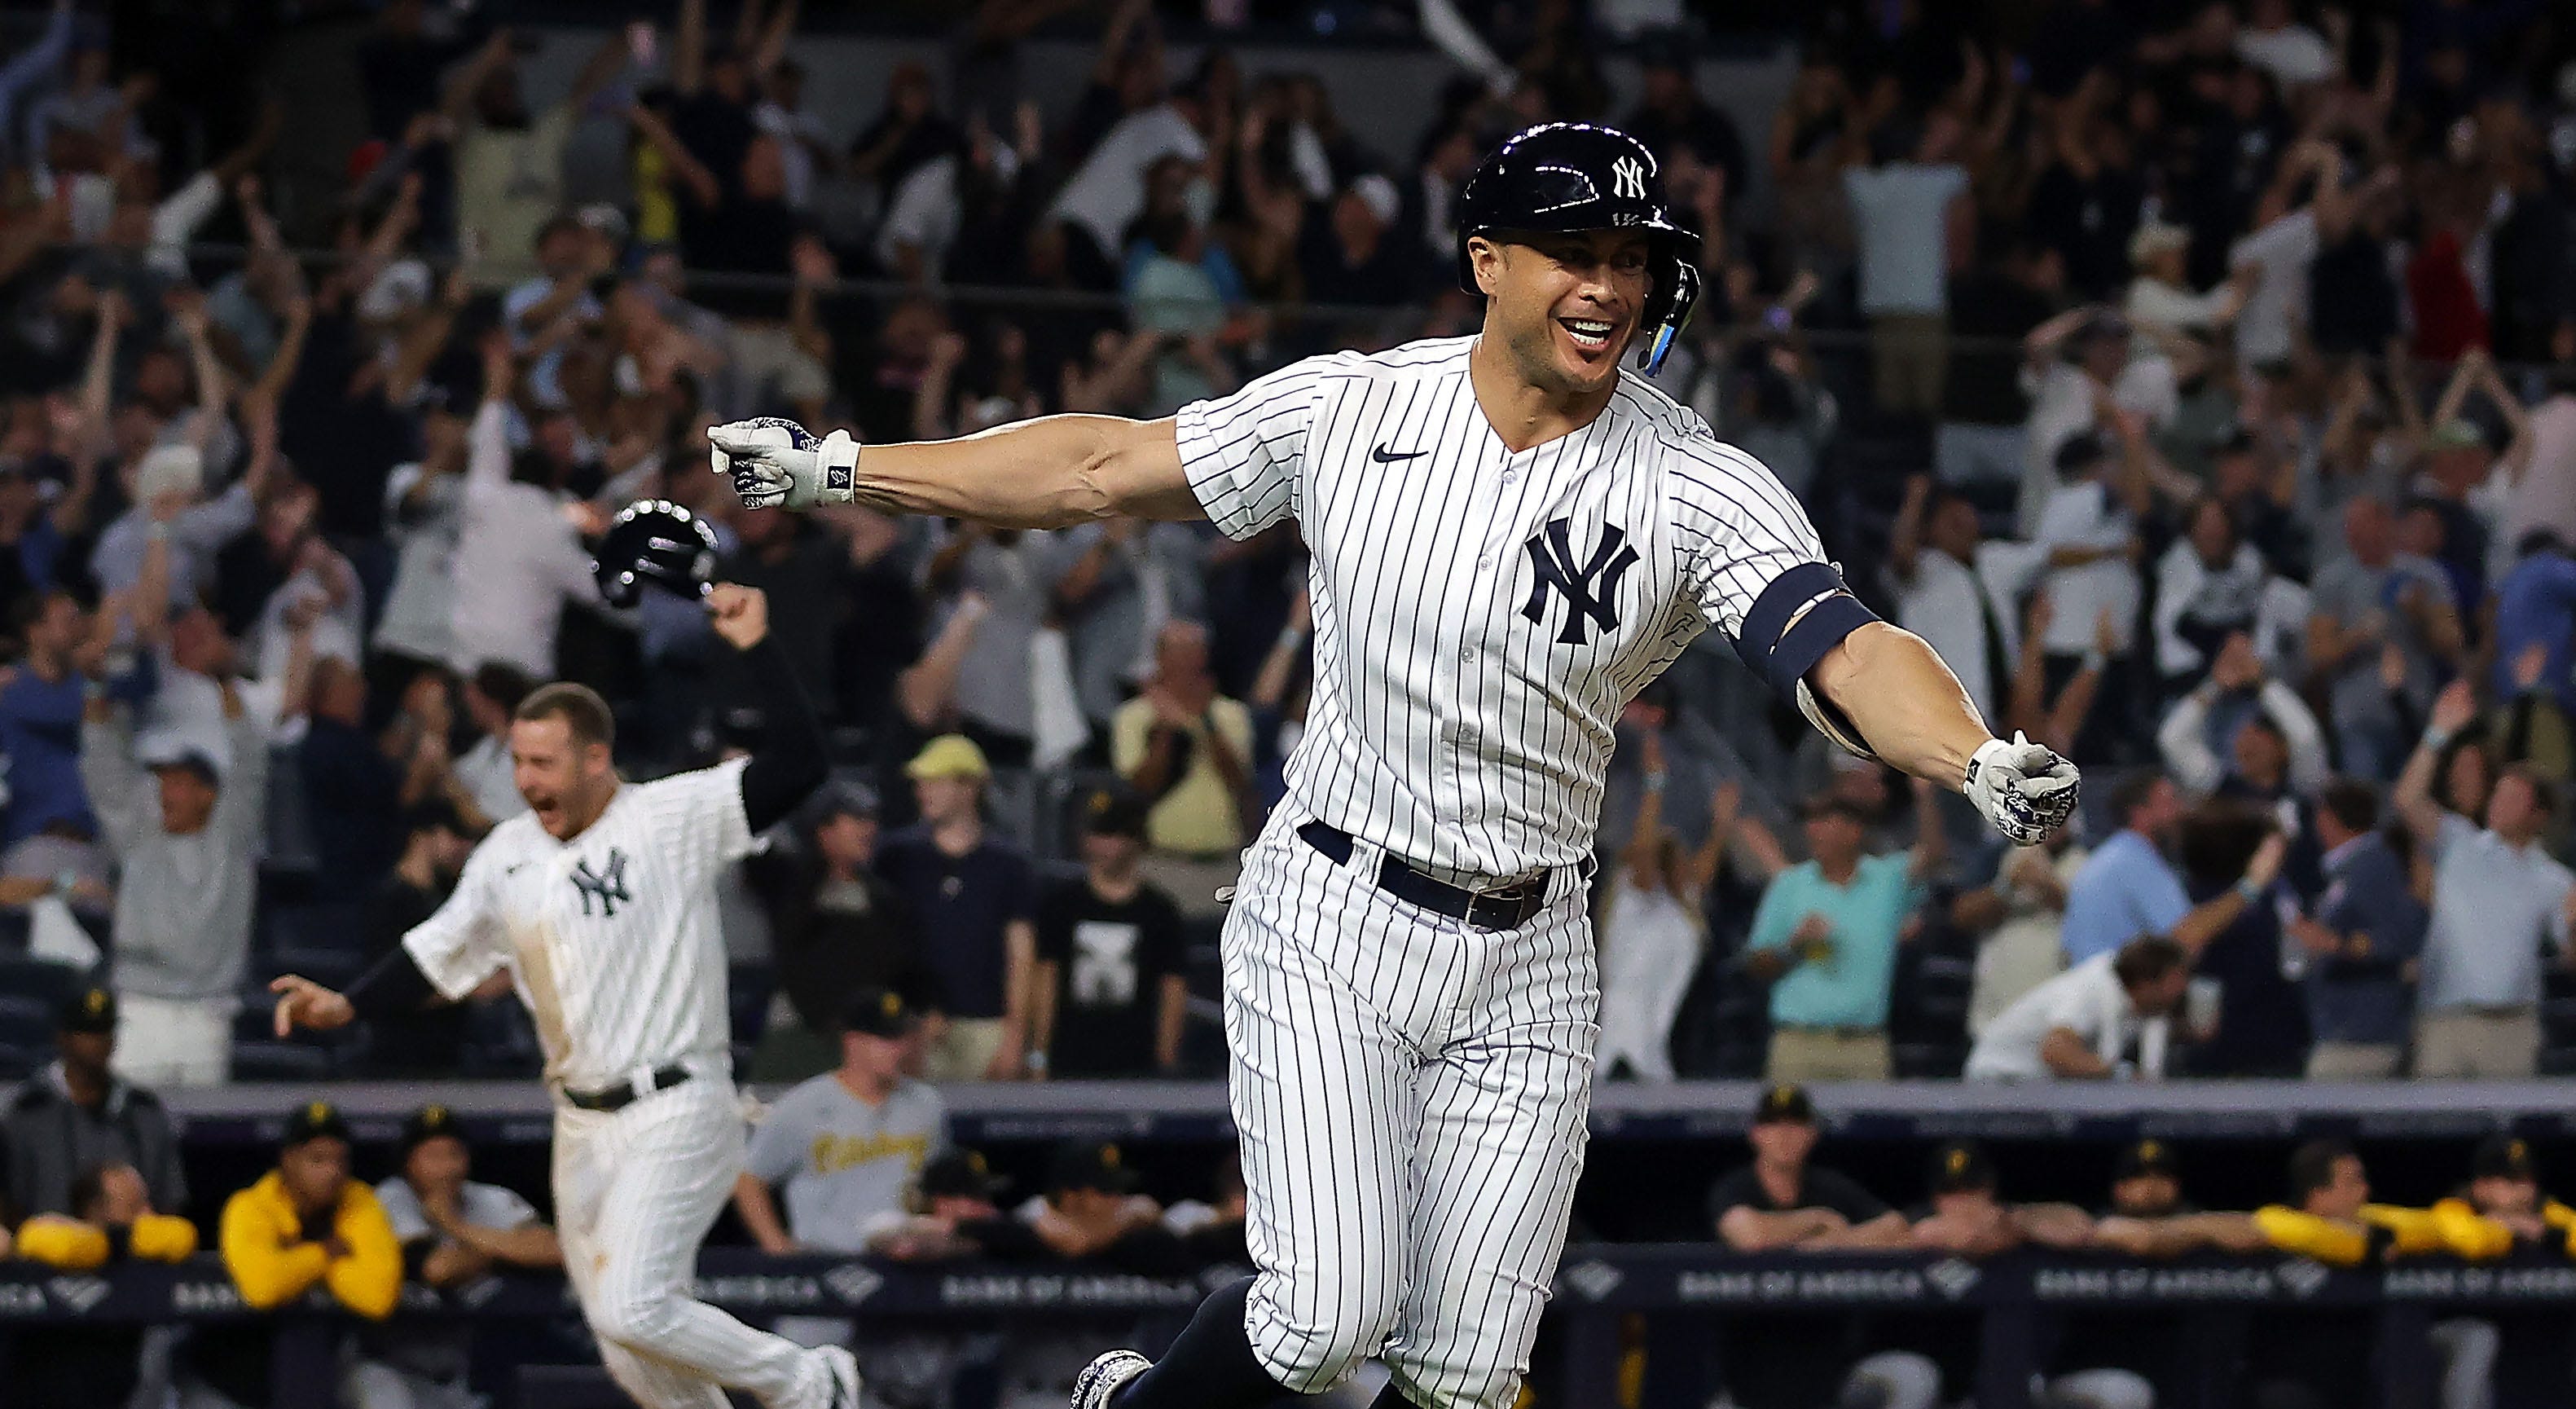 Gleyber Torres hits first career home run in Yankees walkoff win